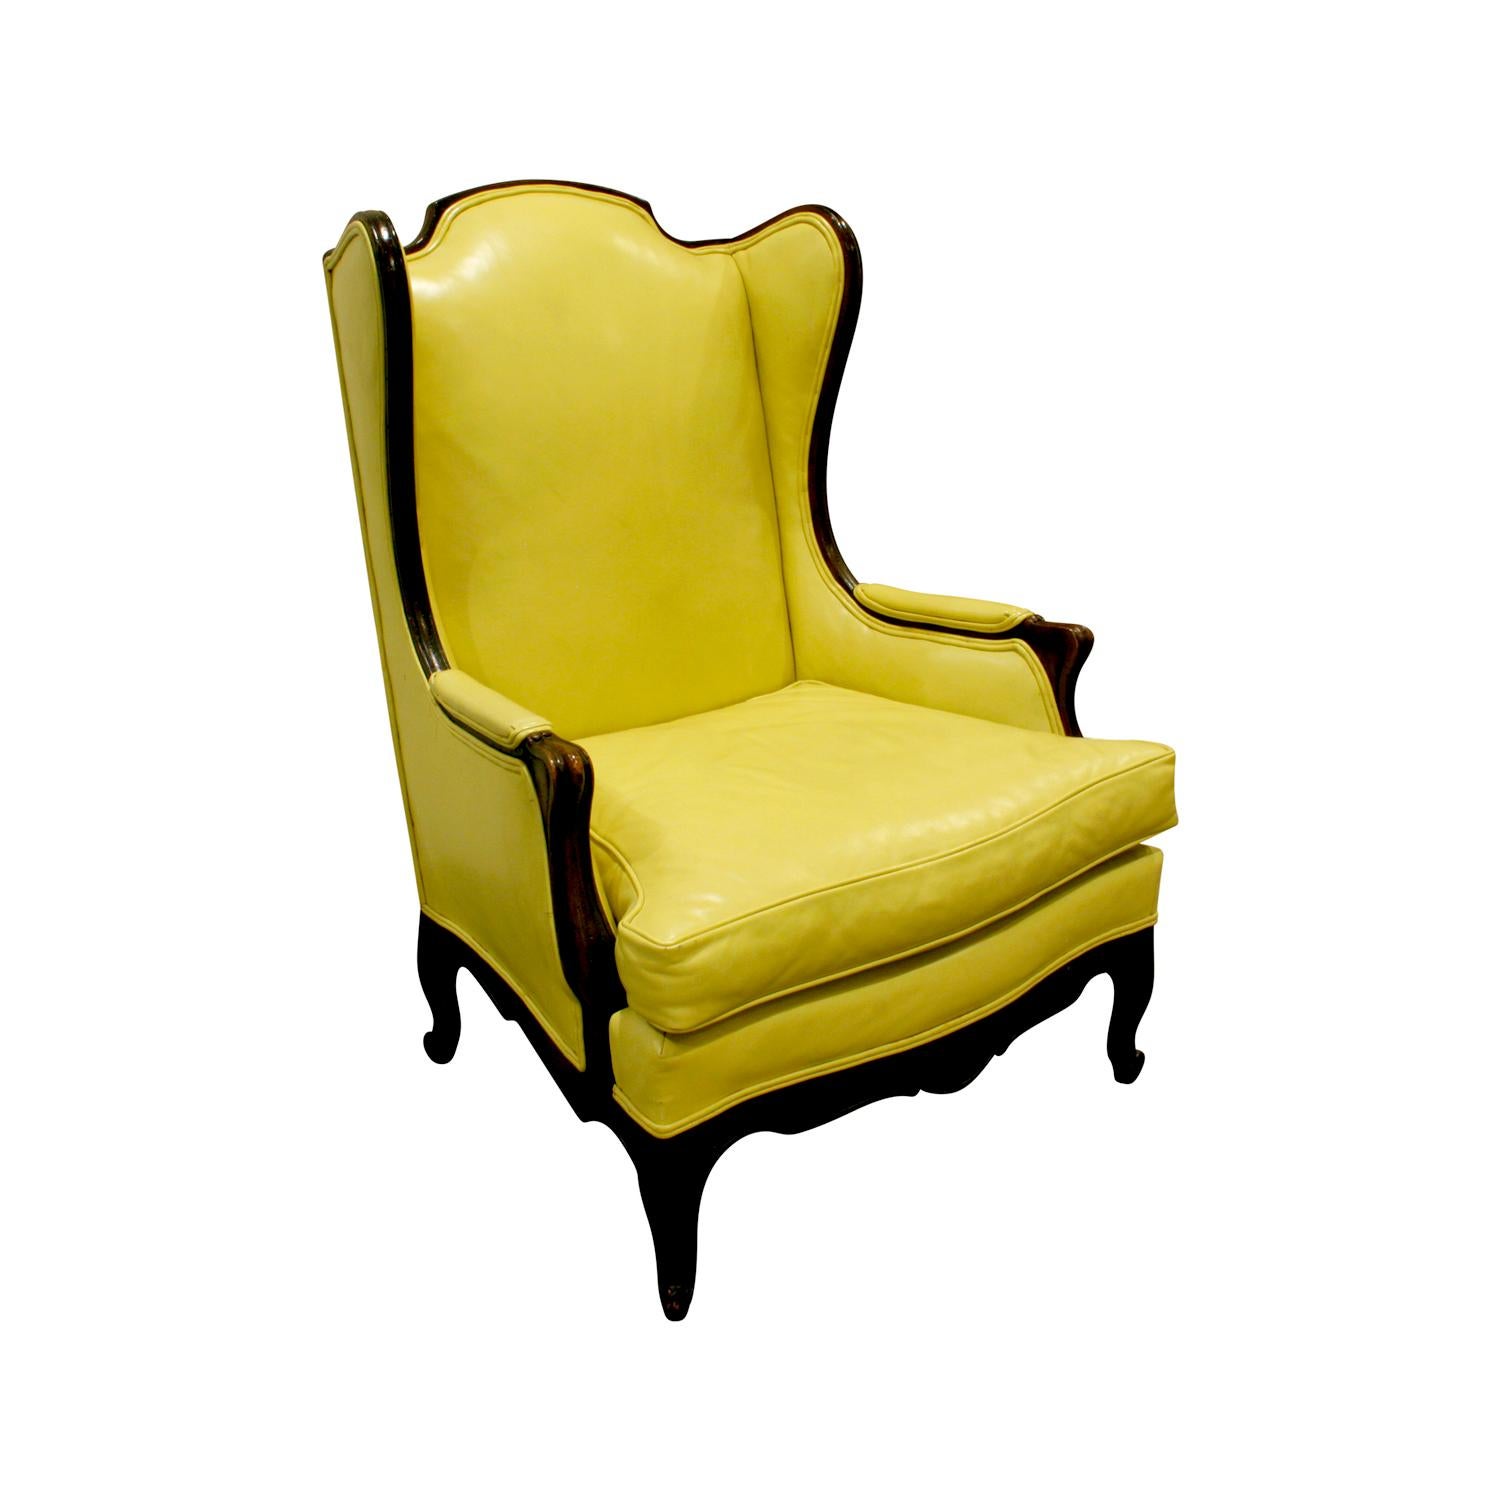 Custom-Made Regency Style Wing Chair, 1950s, Signed